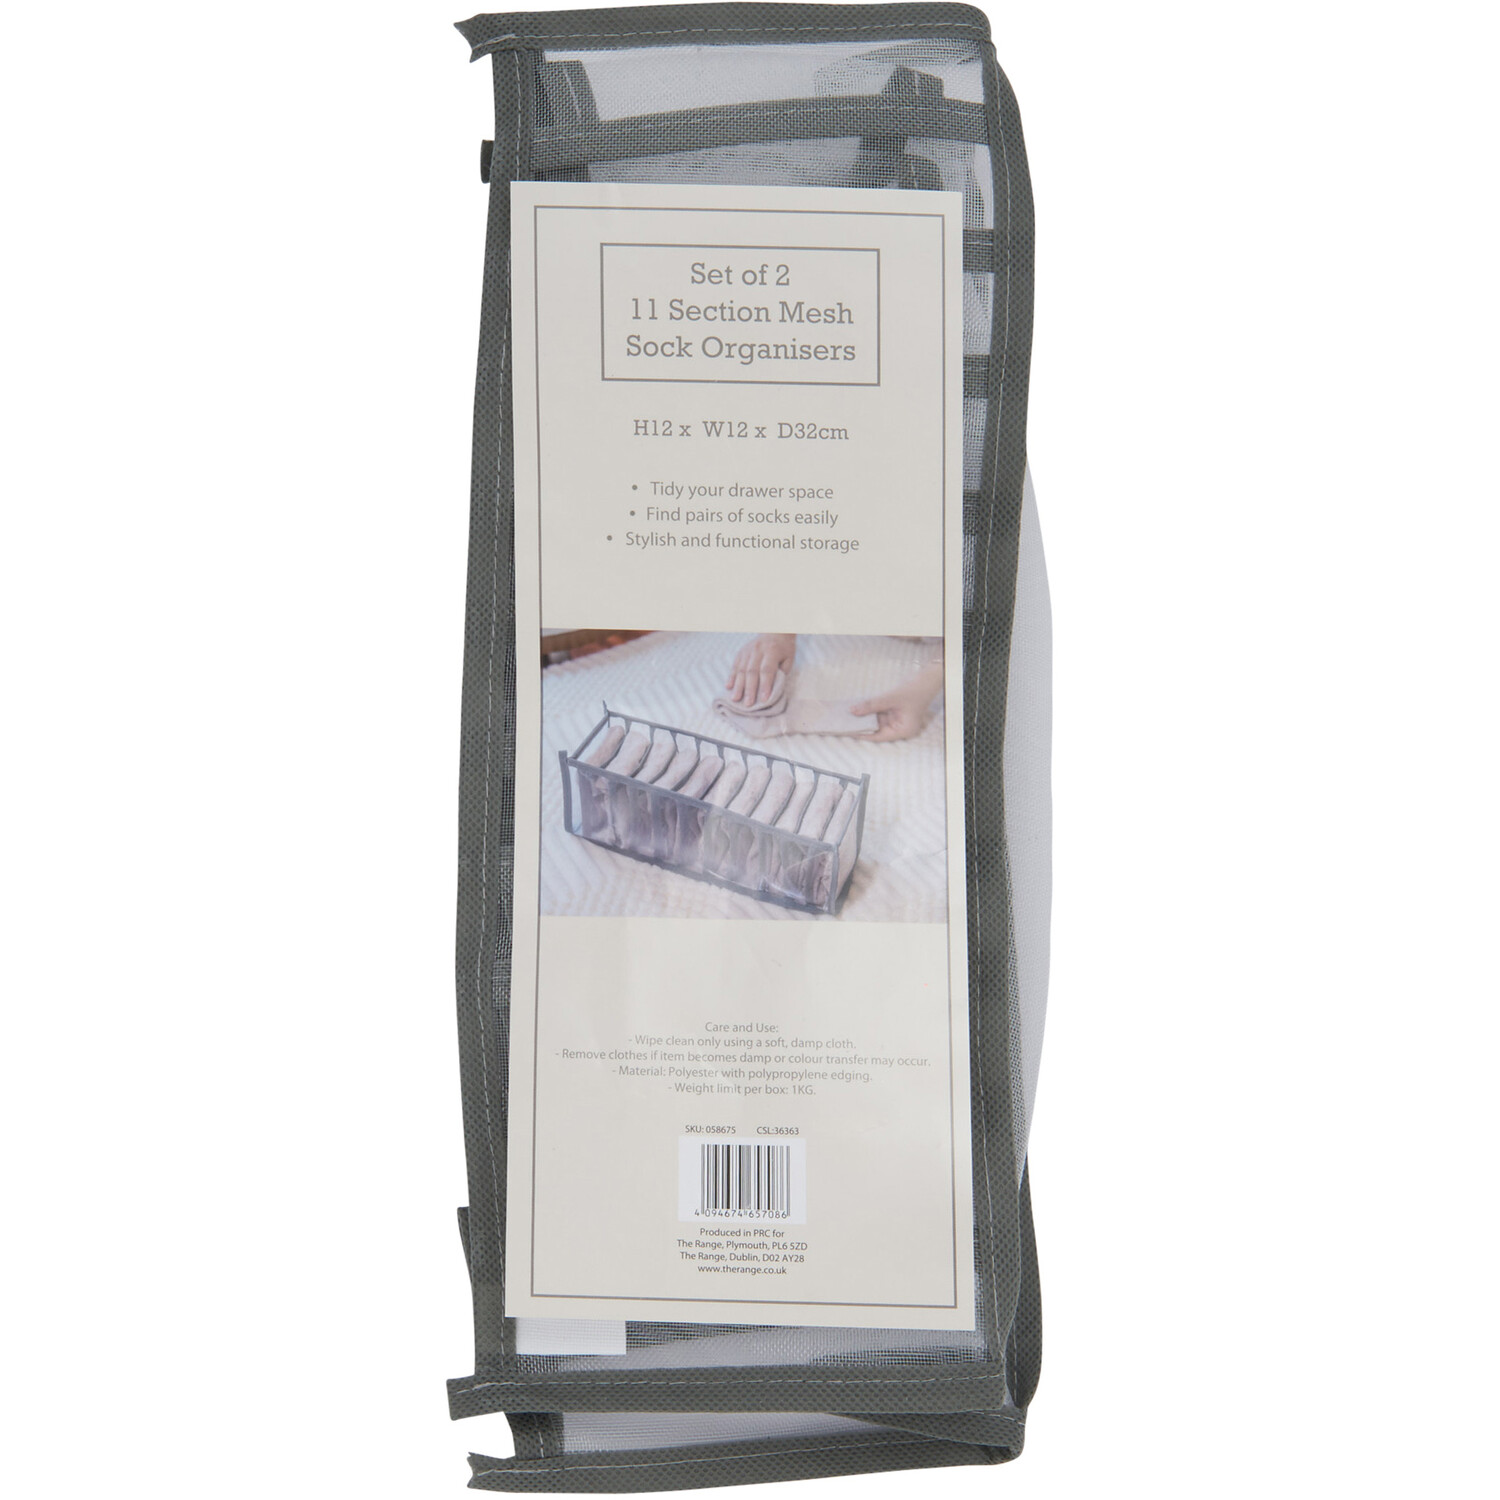 Pack of 2 11 Section Mesh Sock Organisers Image 1